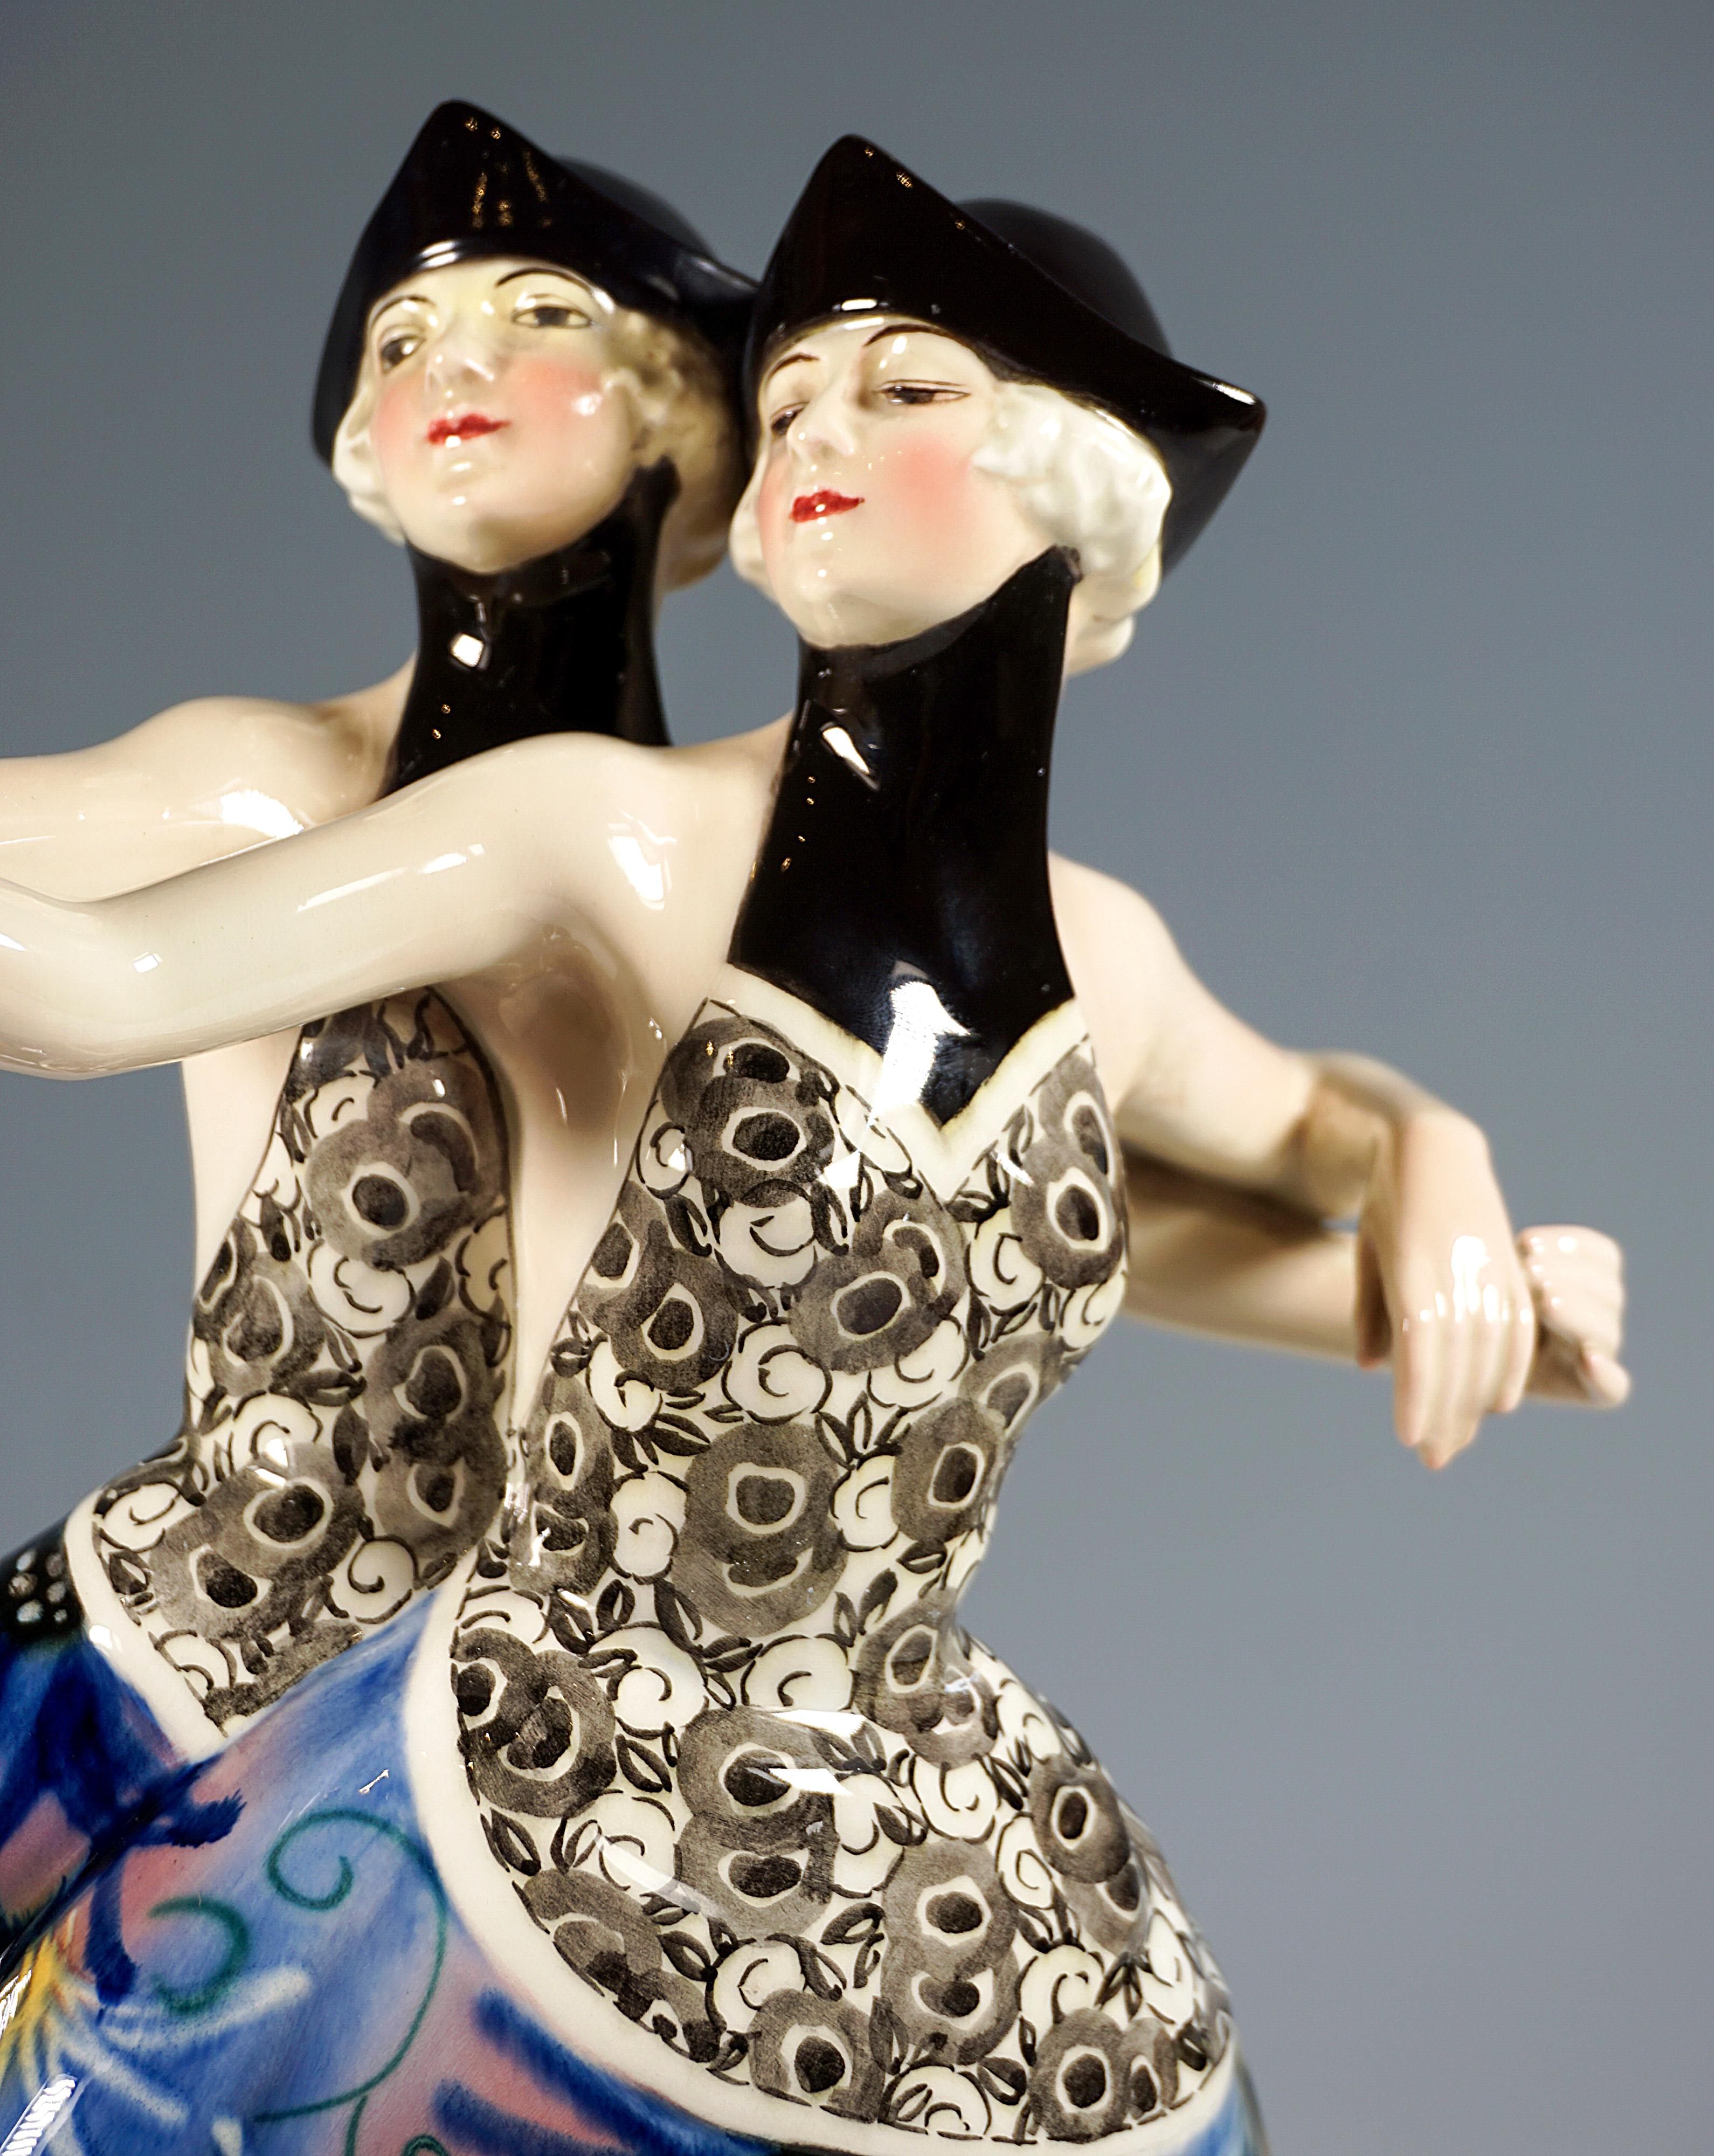 Early 20th Century  Goldscheider Art Déco Group 'Twin Dancers in Phantasy Costume', Lorenzl ca 1926 For Sale